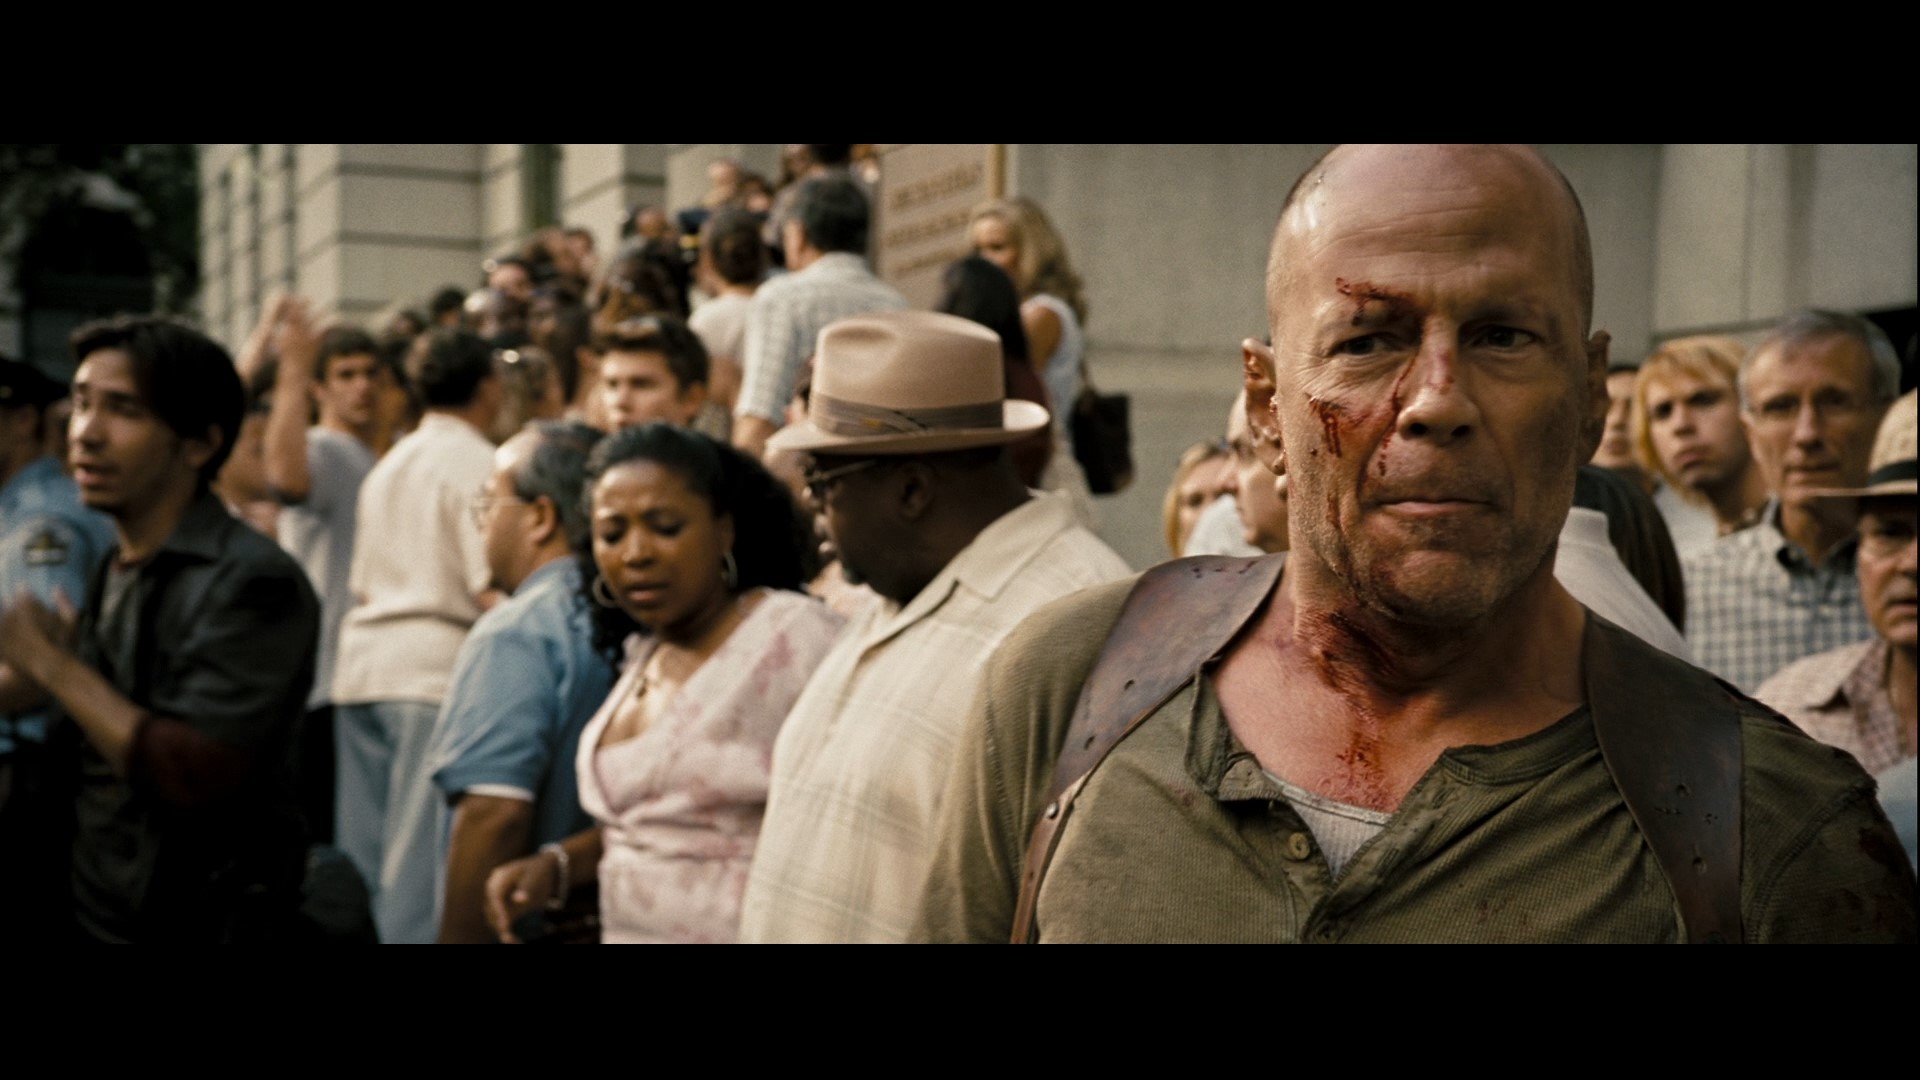 DIE HARD WITH A VENGEANCE (1995) - John McClane (Bruce Willis) Police Badge and Photo ID - Image 7 of 7